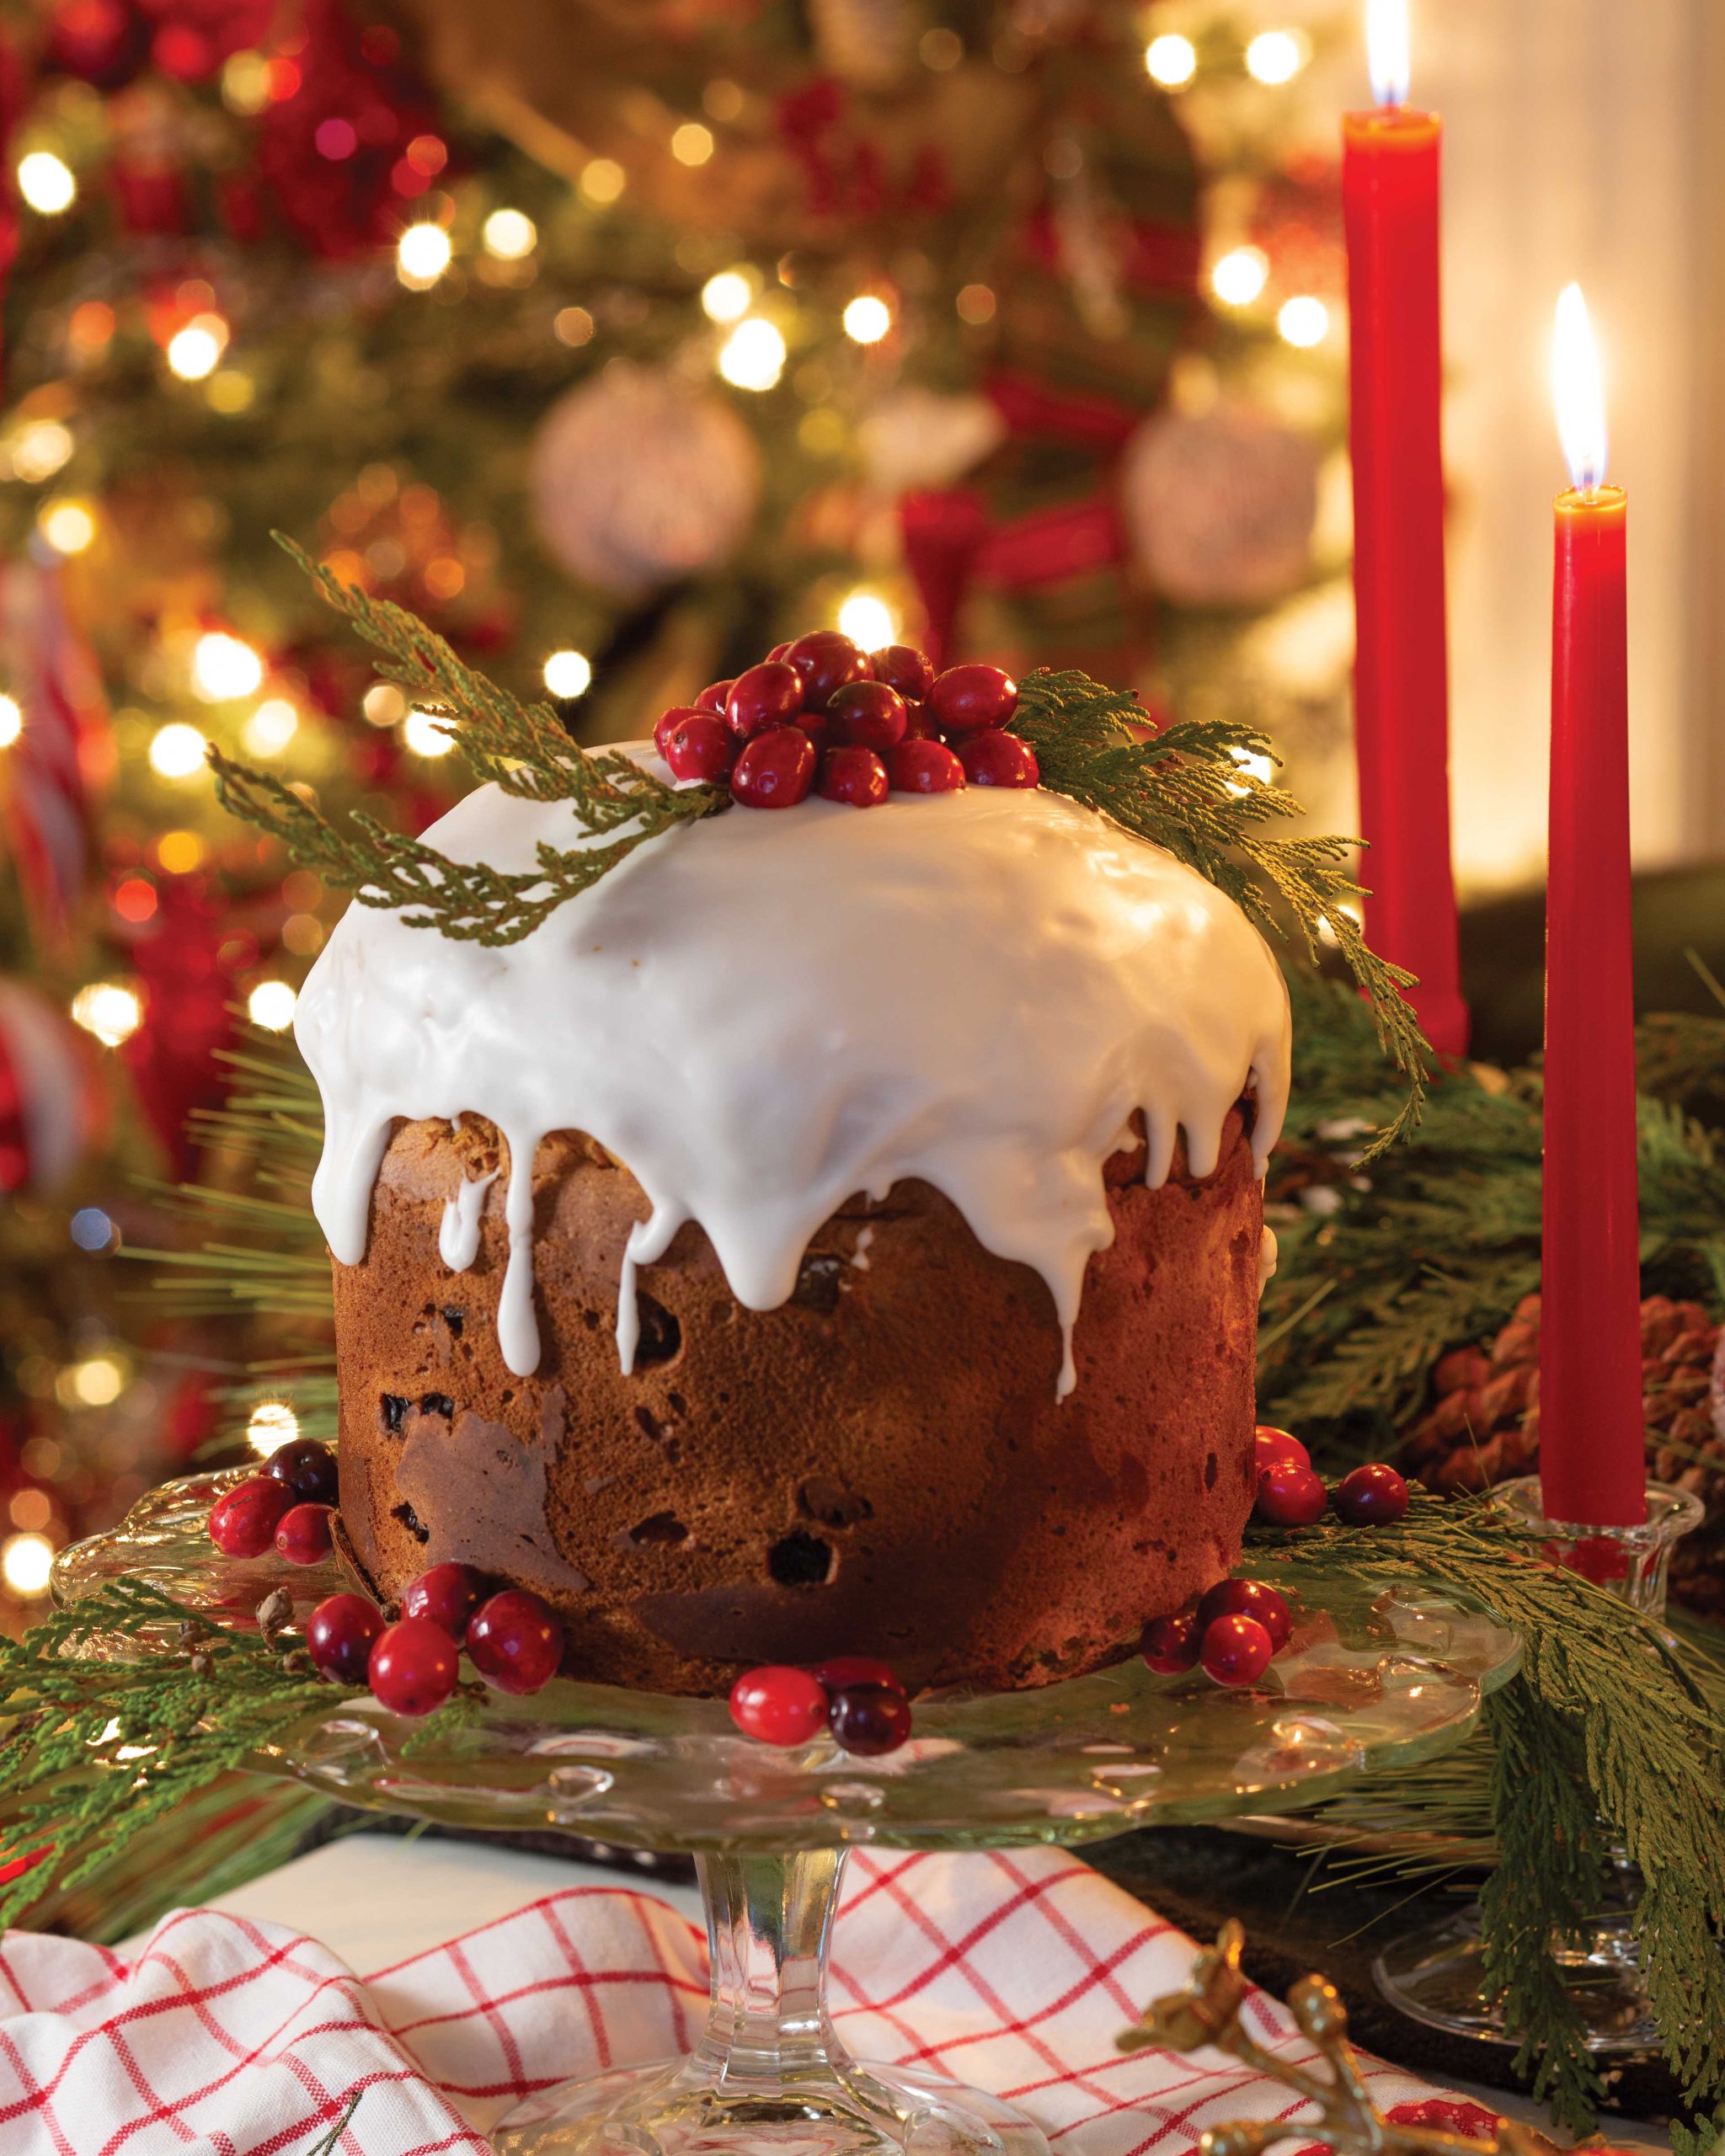 Against a backdrop of glowing lights on the tree, a glazed panettone cake dressed with cranberries shines in the light of two red candlesticks